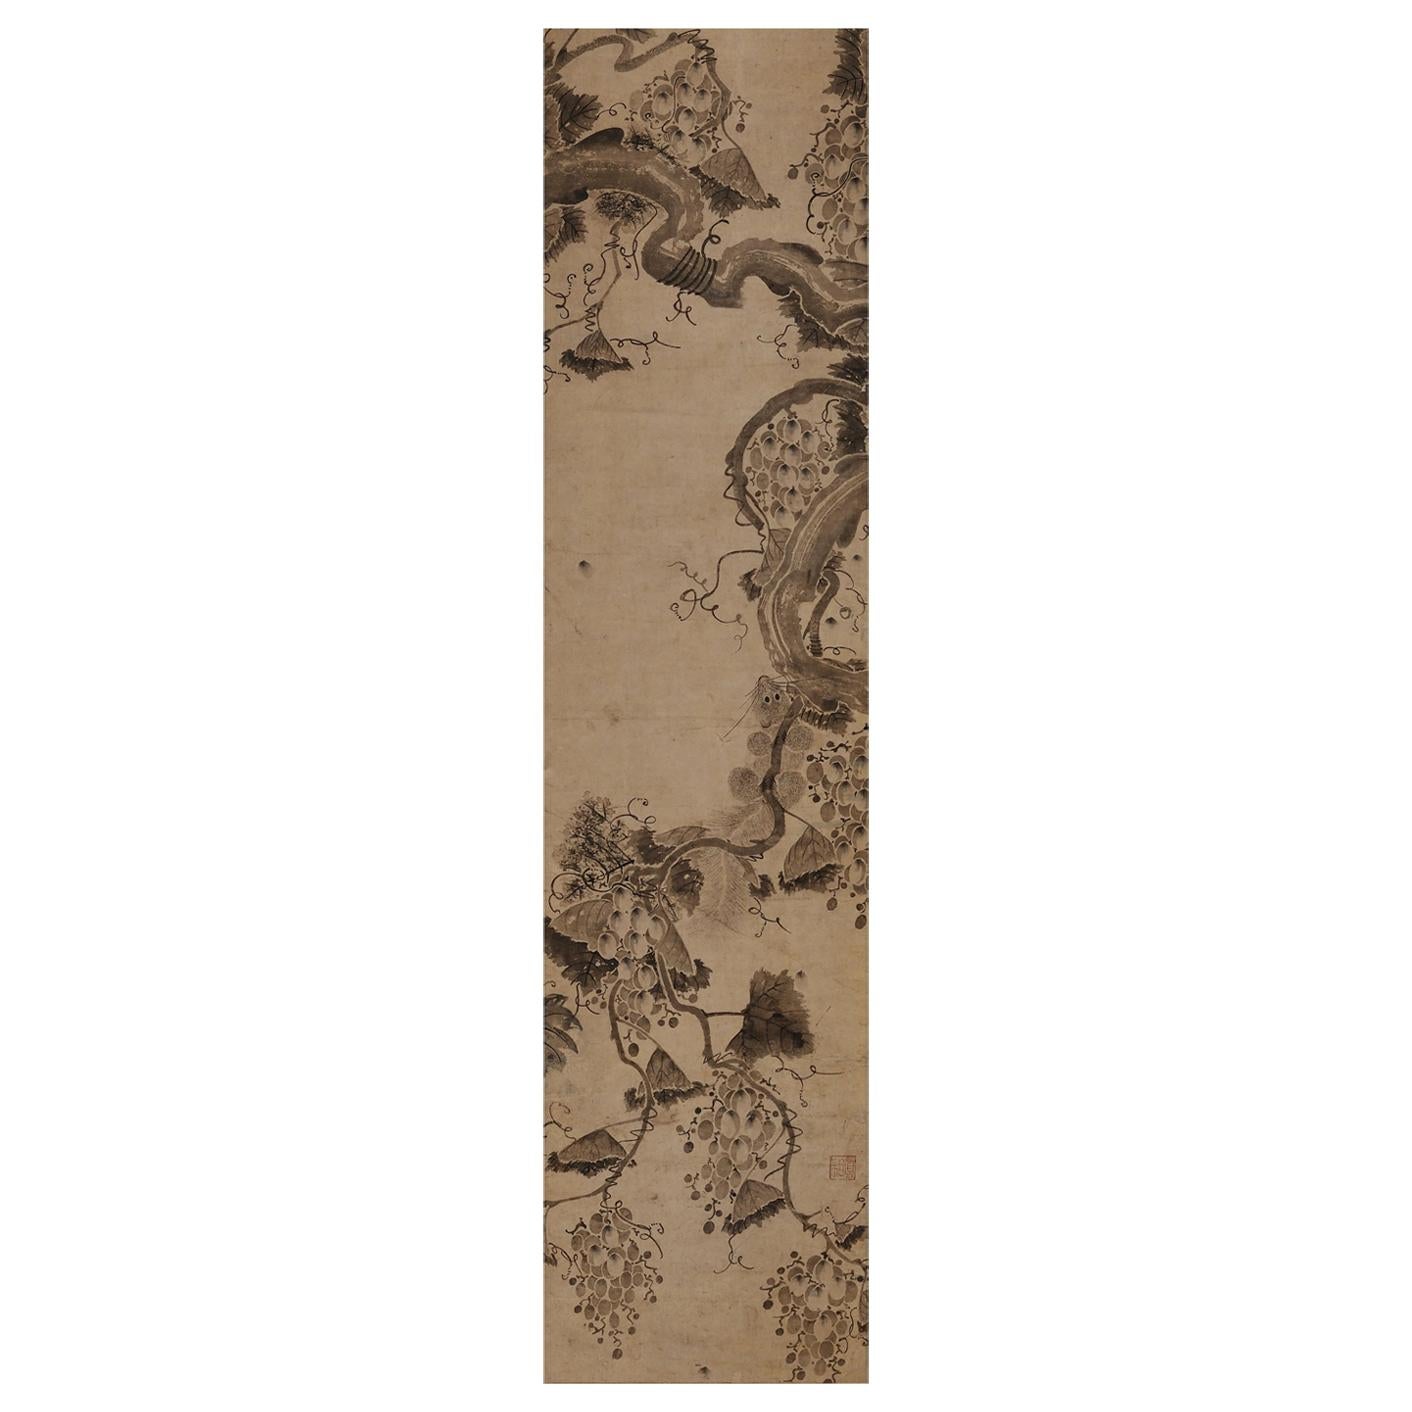 17th Century Korean Grapevine and Squirrel Scroll Painting, Mid Joseon Period